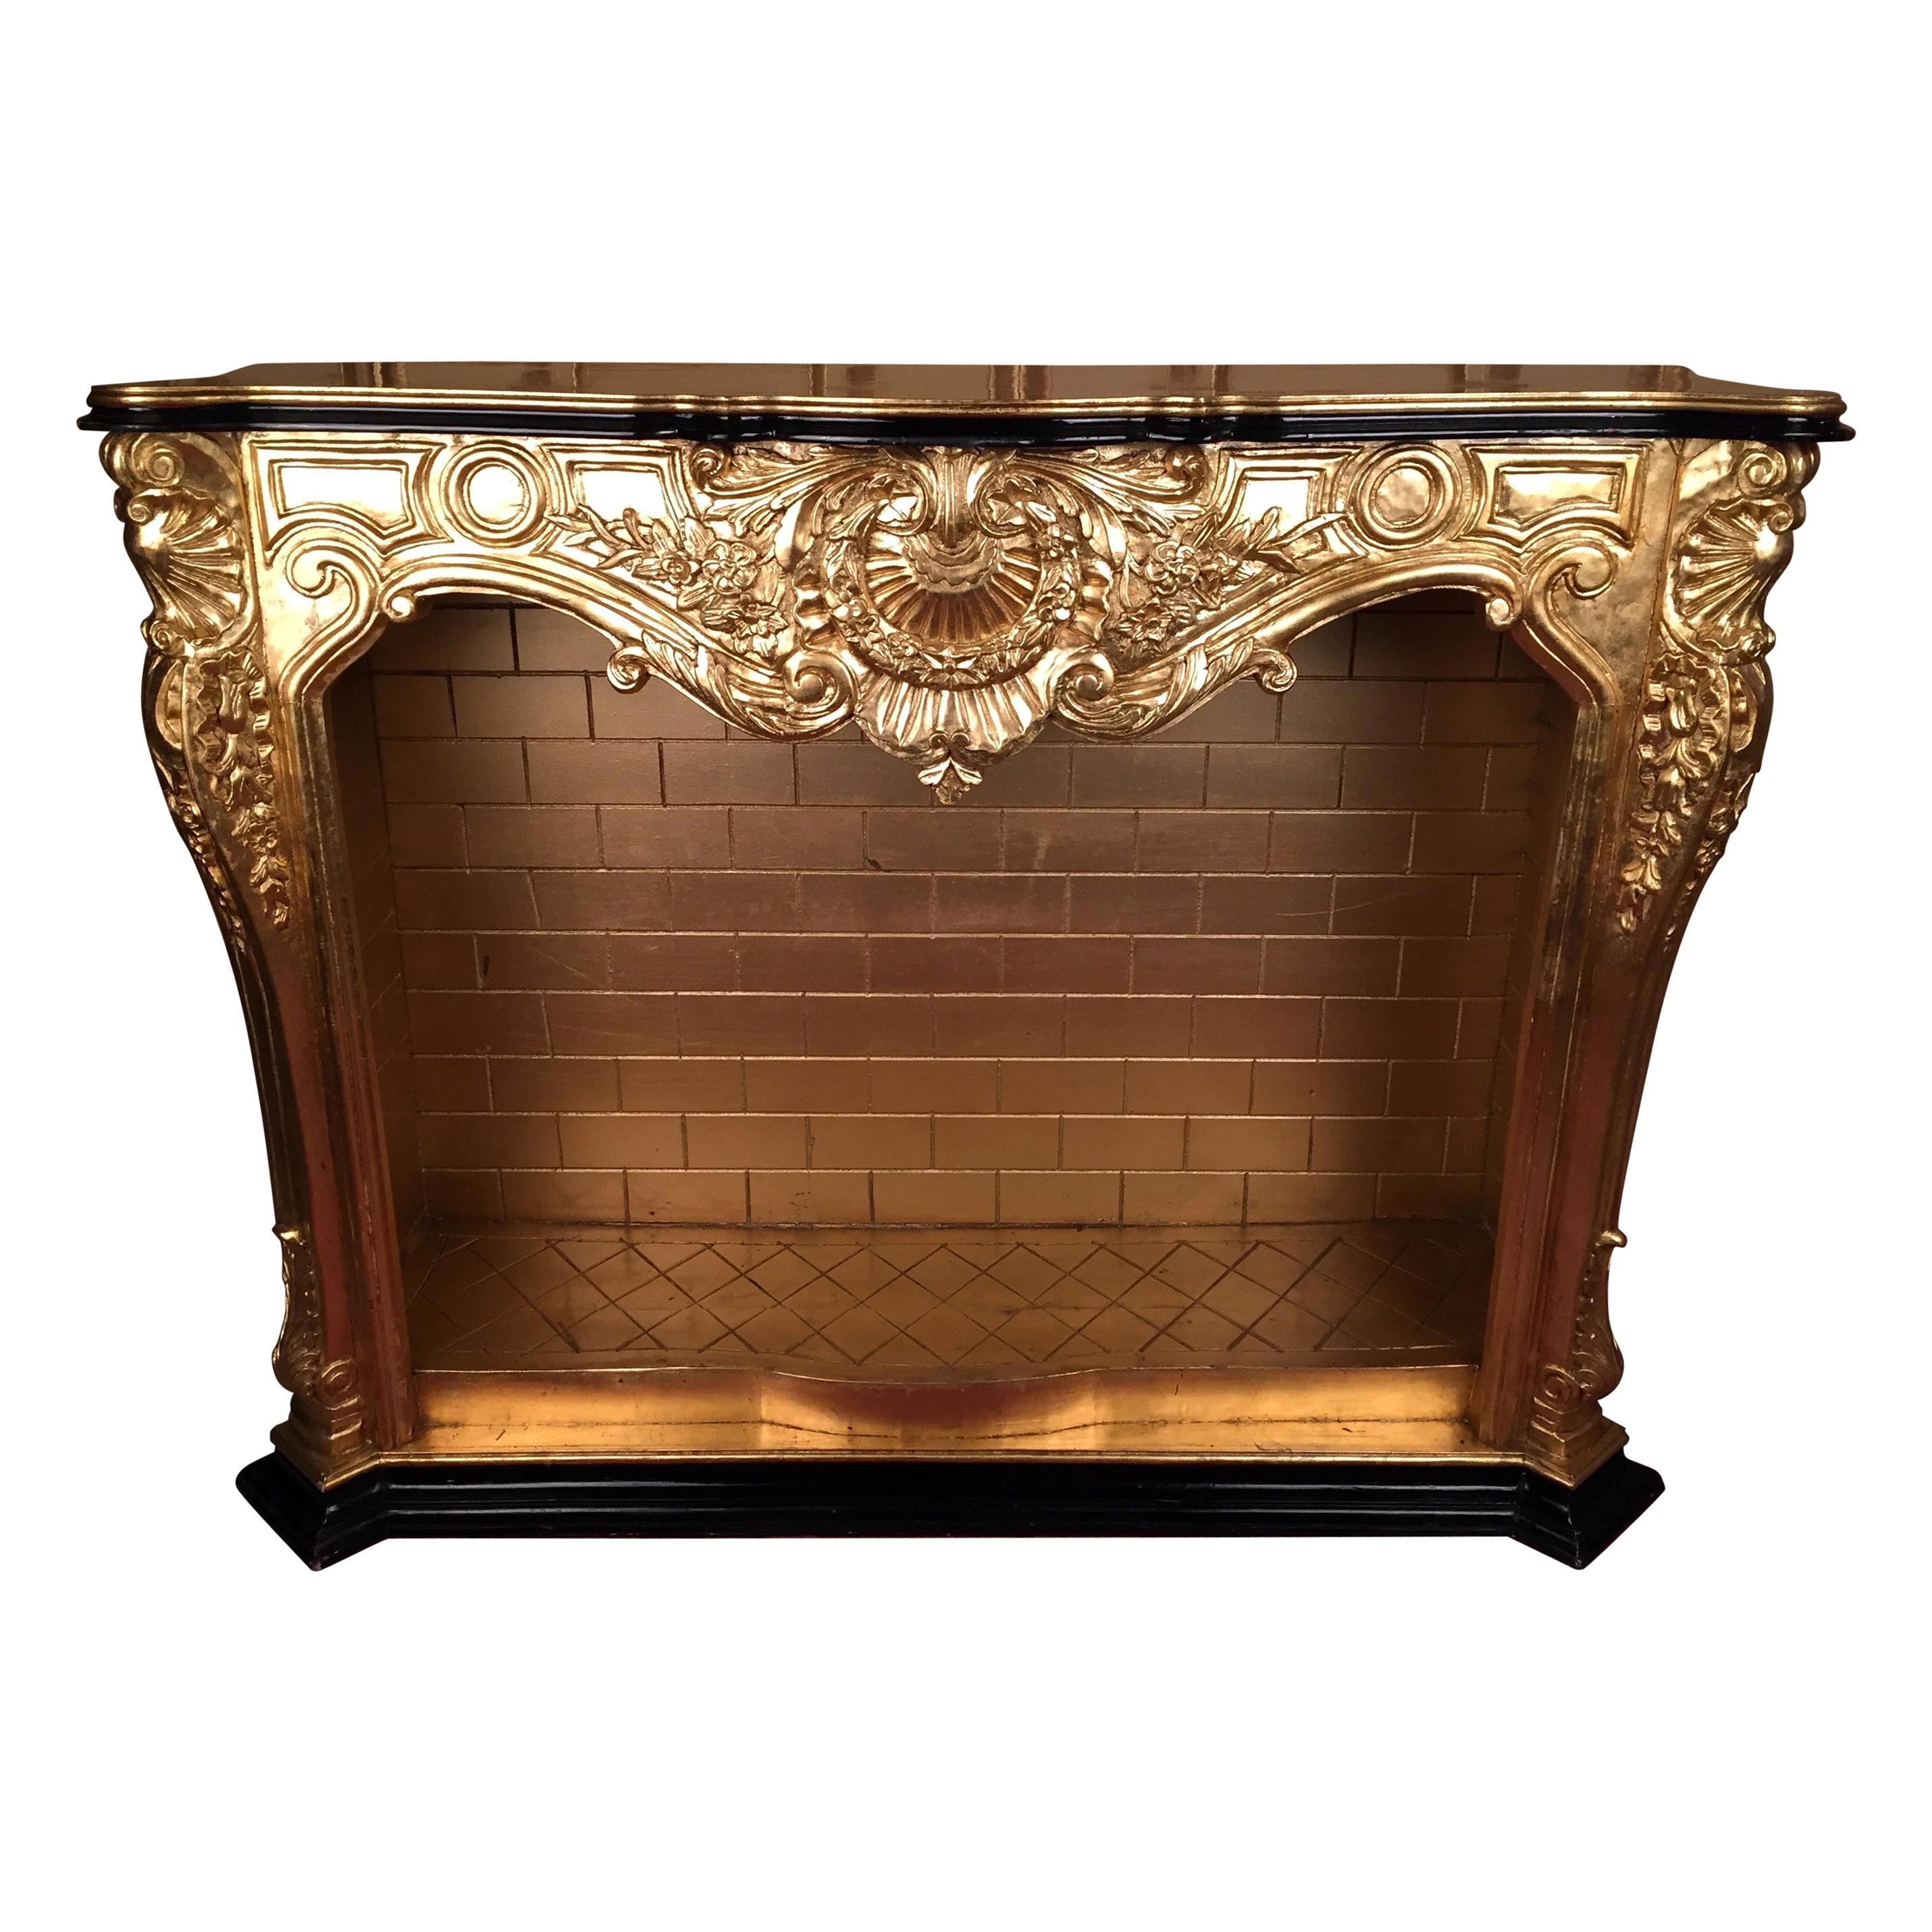 20th Century Louis XV Decorative Fireplace For Sale